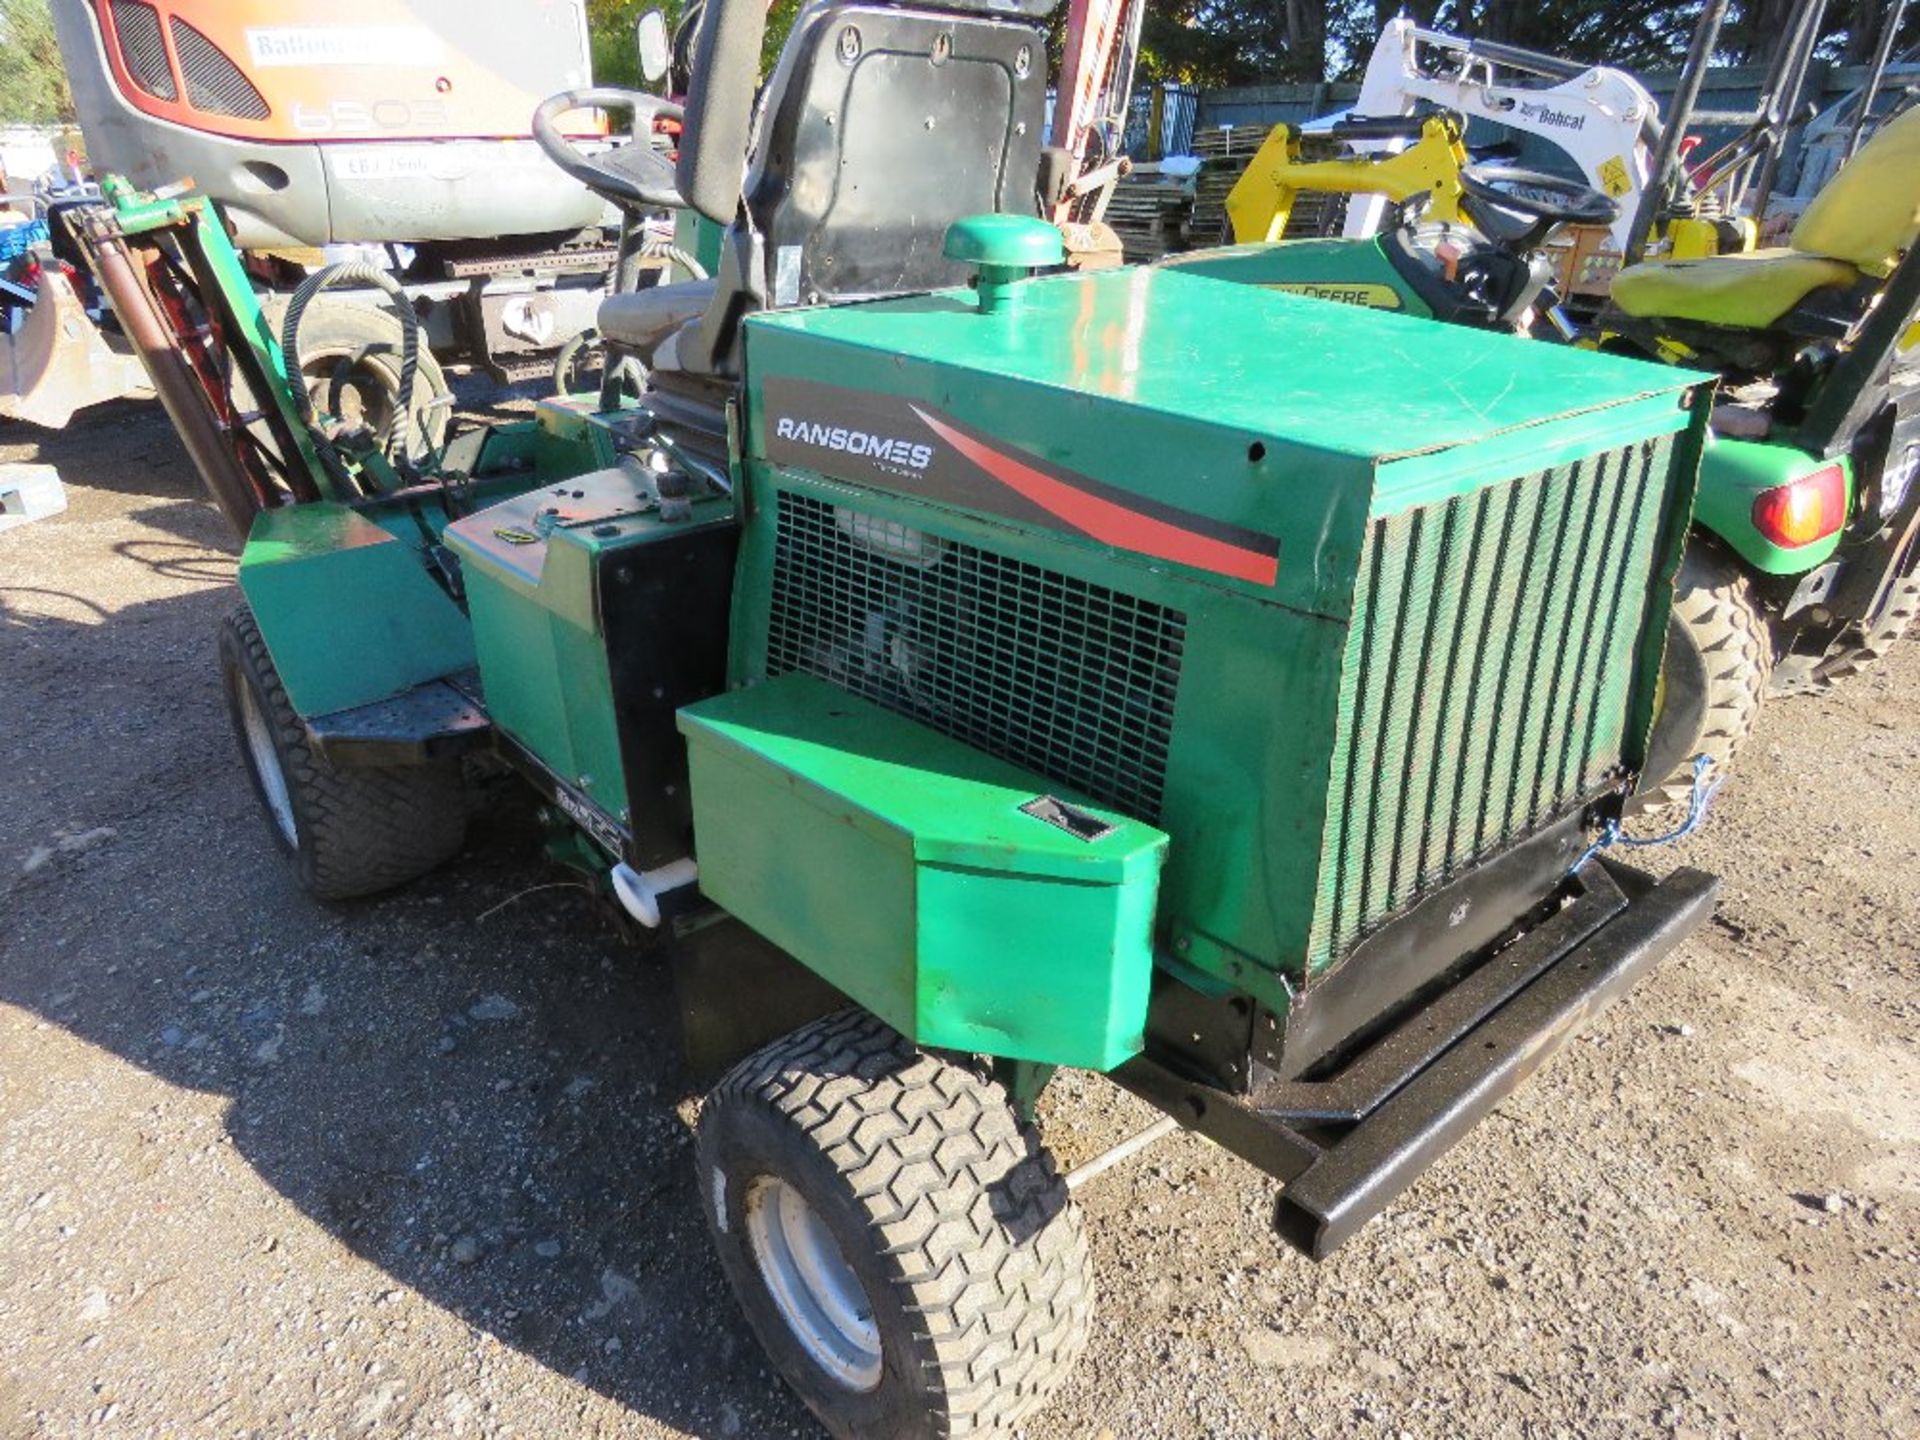 RANSOMES 213 RIDE ON TRIPLE MOWER WITH KUBOTA ENGINE. WHEN TESTED WAS SEEN RO RUN , DRIVE AND CYLIND - Image 4 of 7